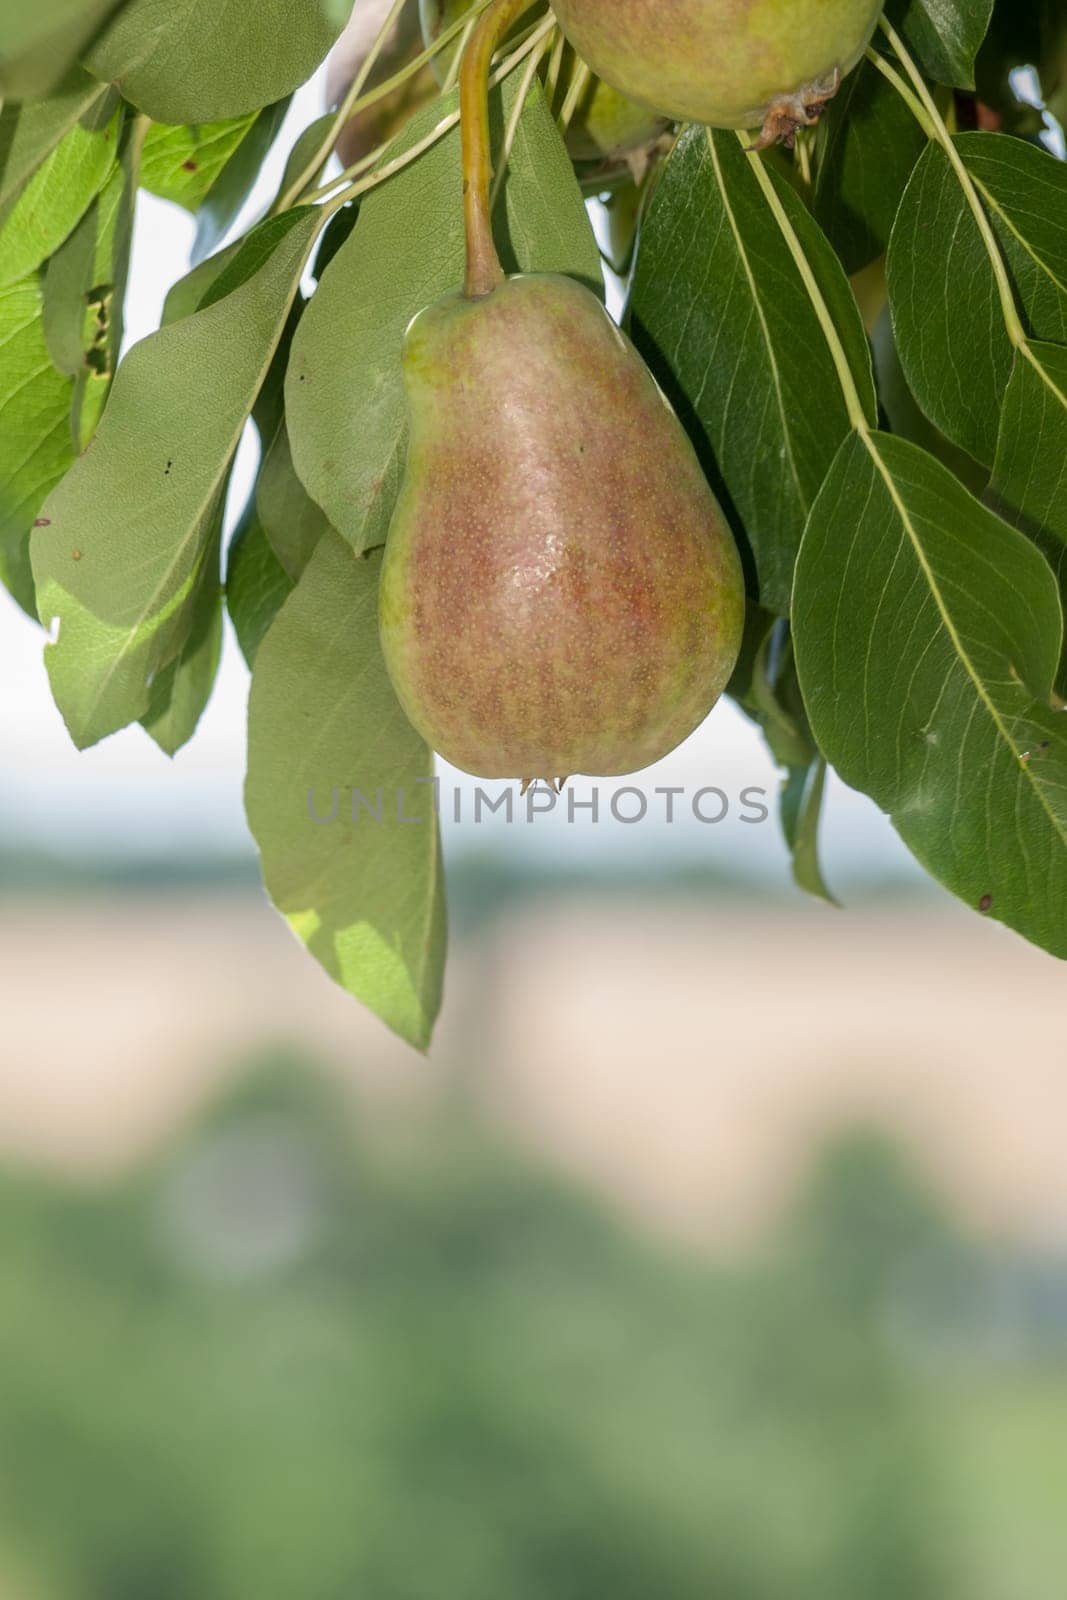 Close-up view of pears on the tree in summer day with blurred background. Shallow depth of field.